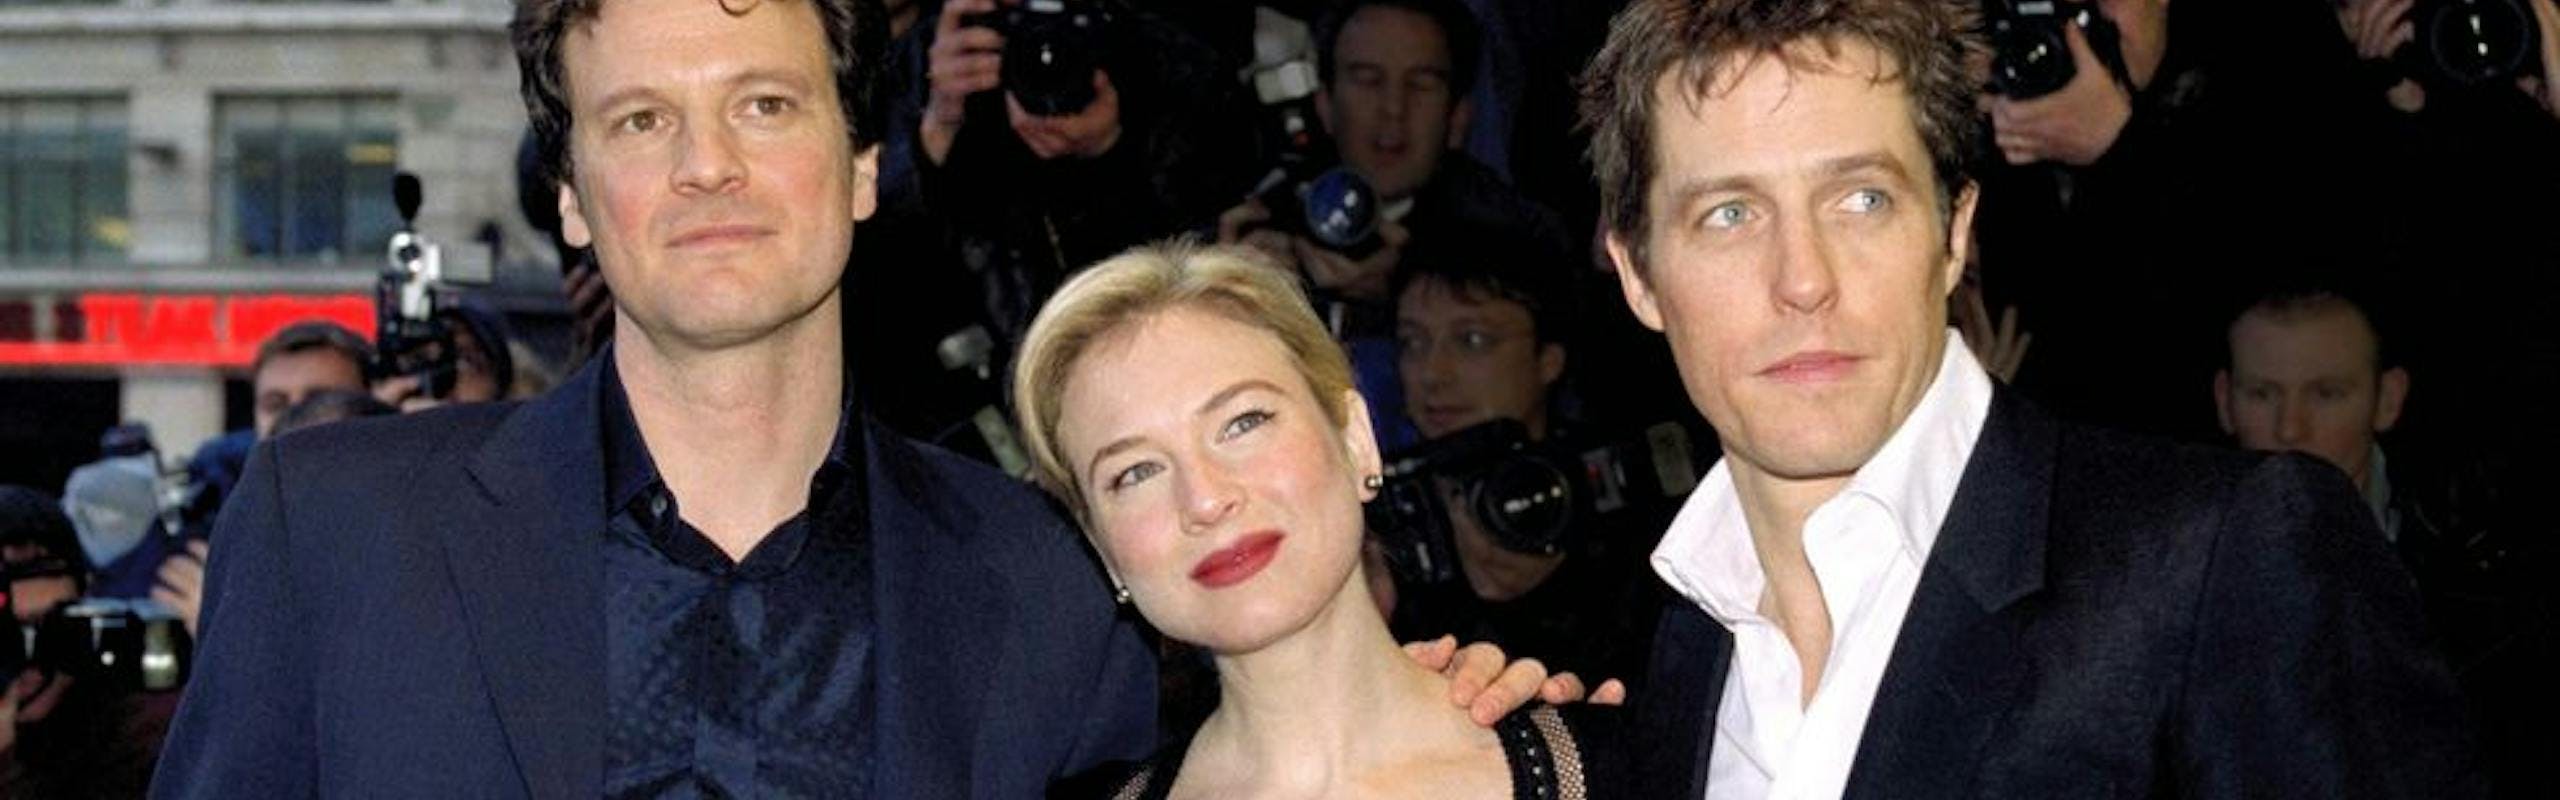 Colin Firth, Renée Zellweger, and Hugh Grant pose for a photo on a red carpet together